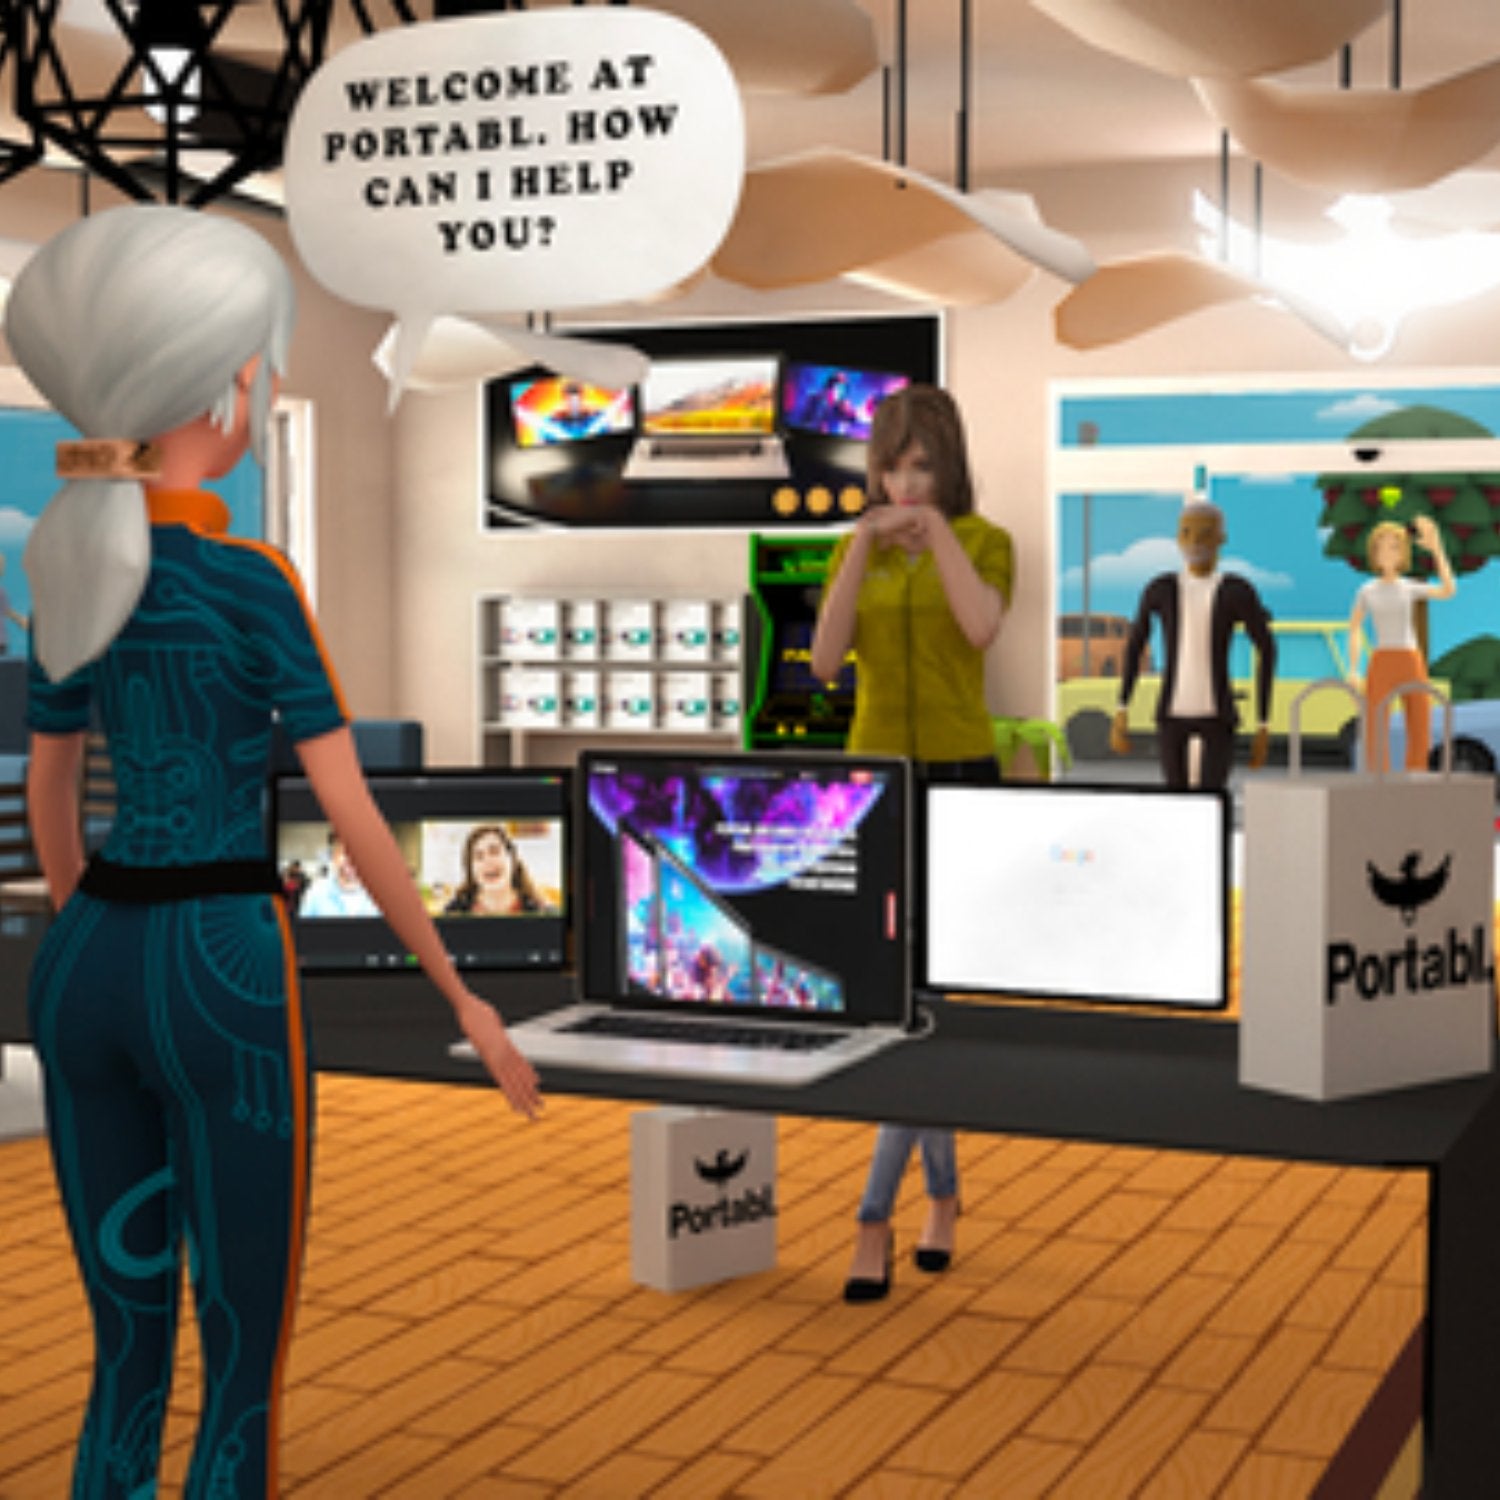 Business Wire - Portabl Proud to Be the First Startup Ever to Hire Full-Time Real Jobs in the Metaverse - The Portable Monitor